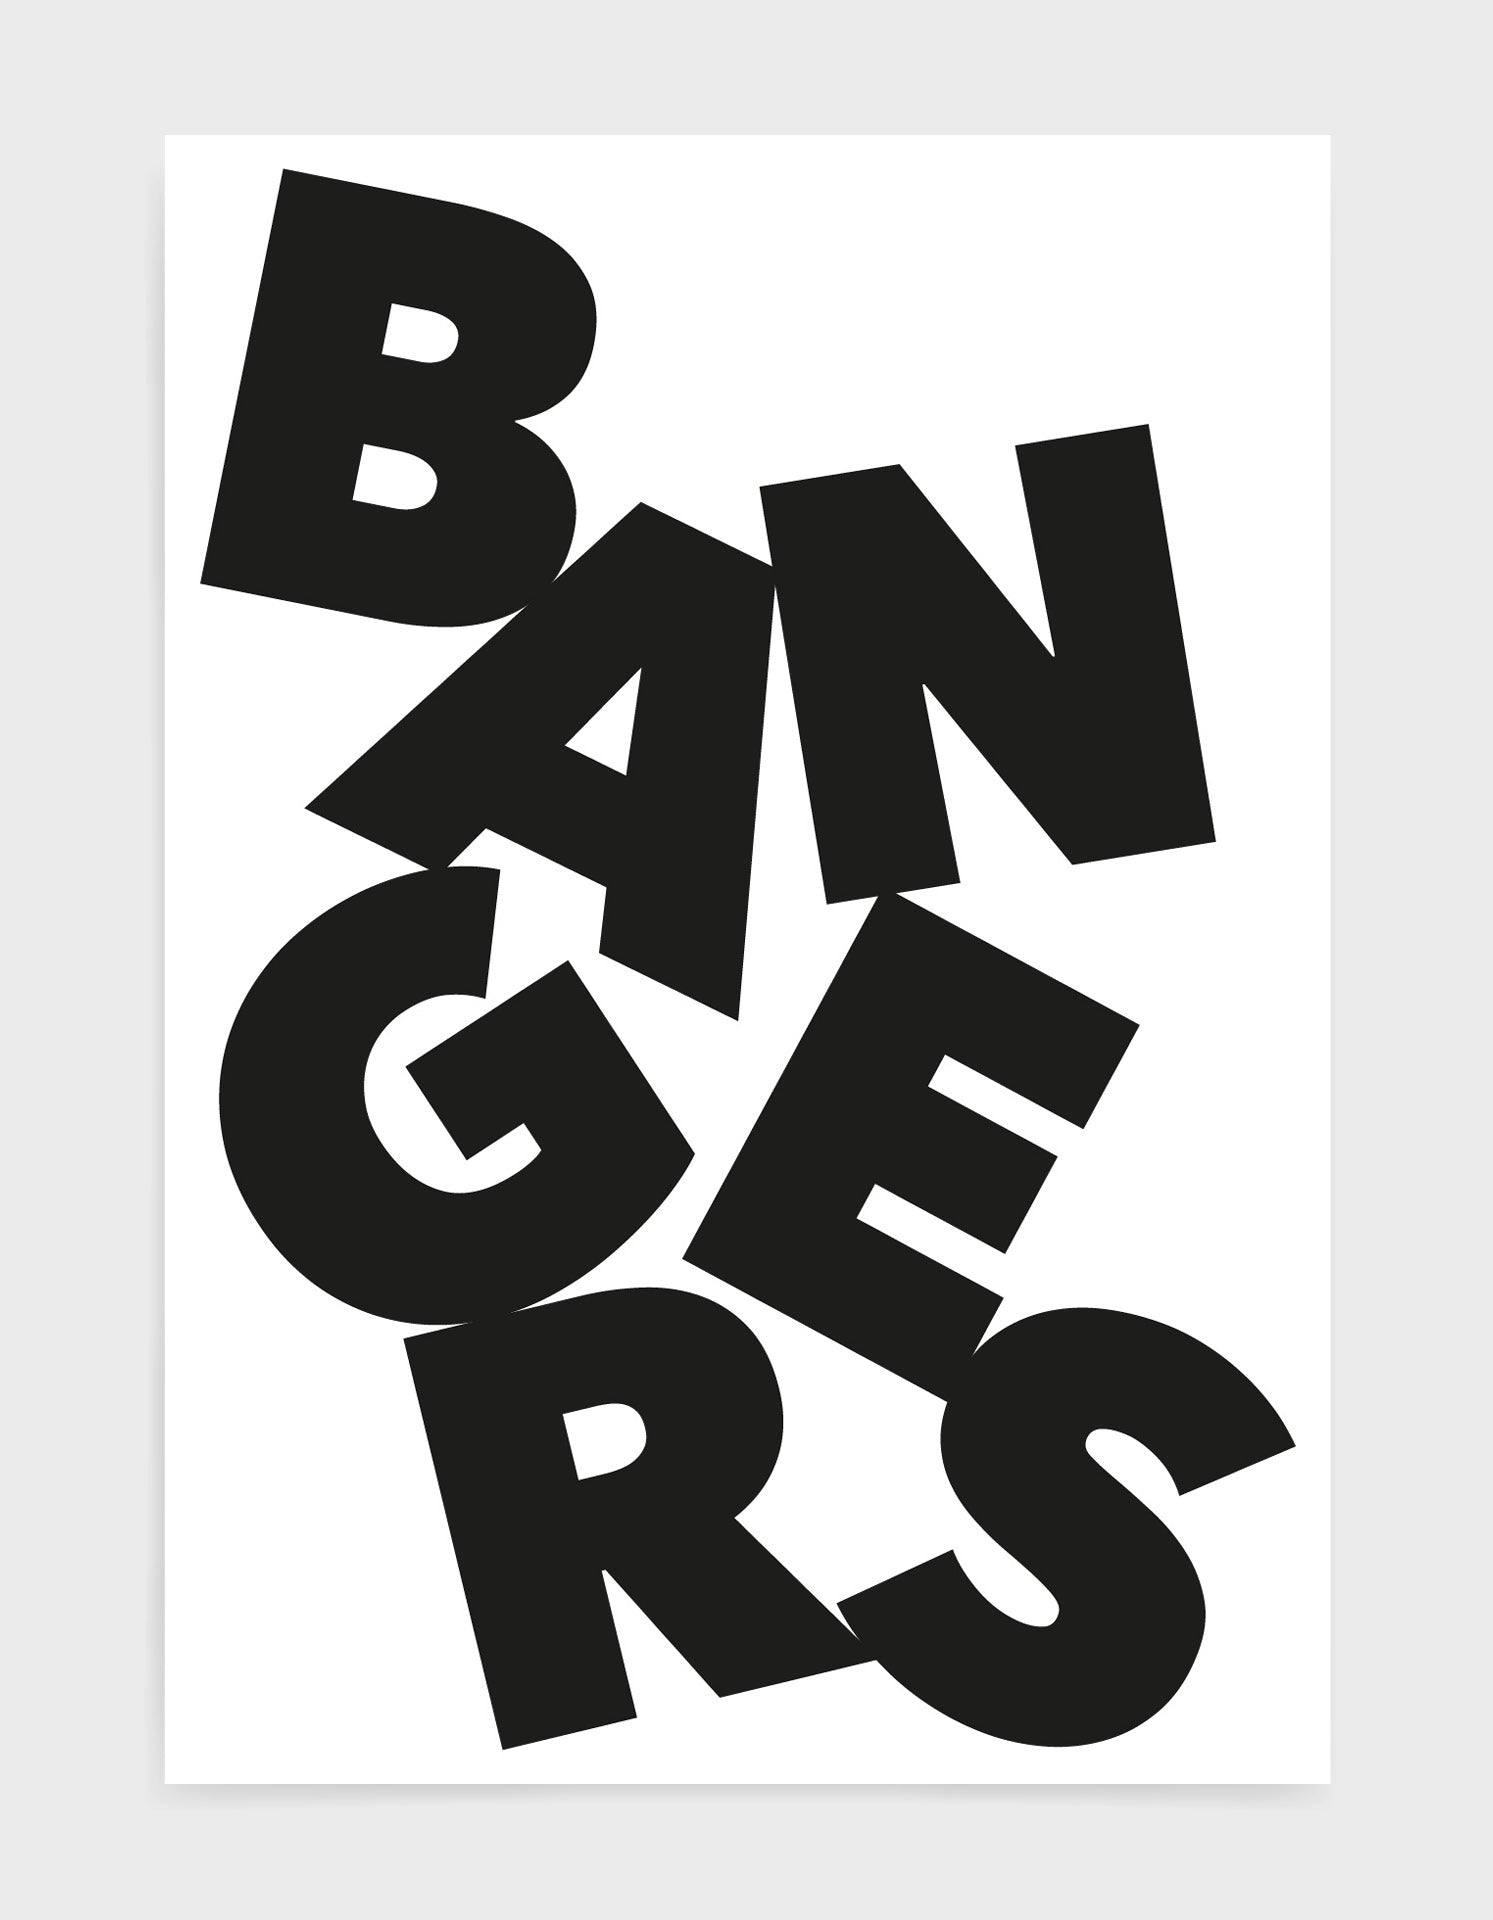 typography art print of the word Bangers in black text against a white background